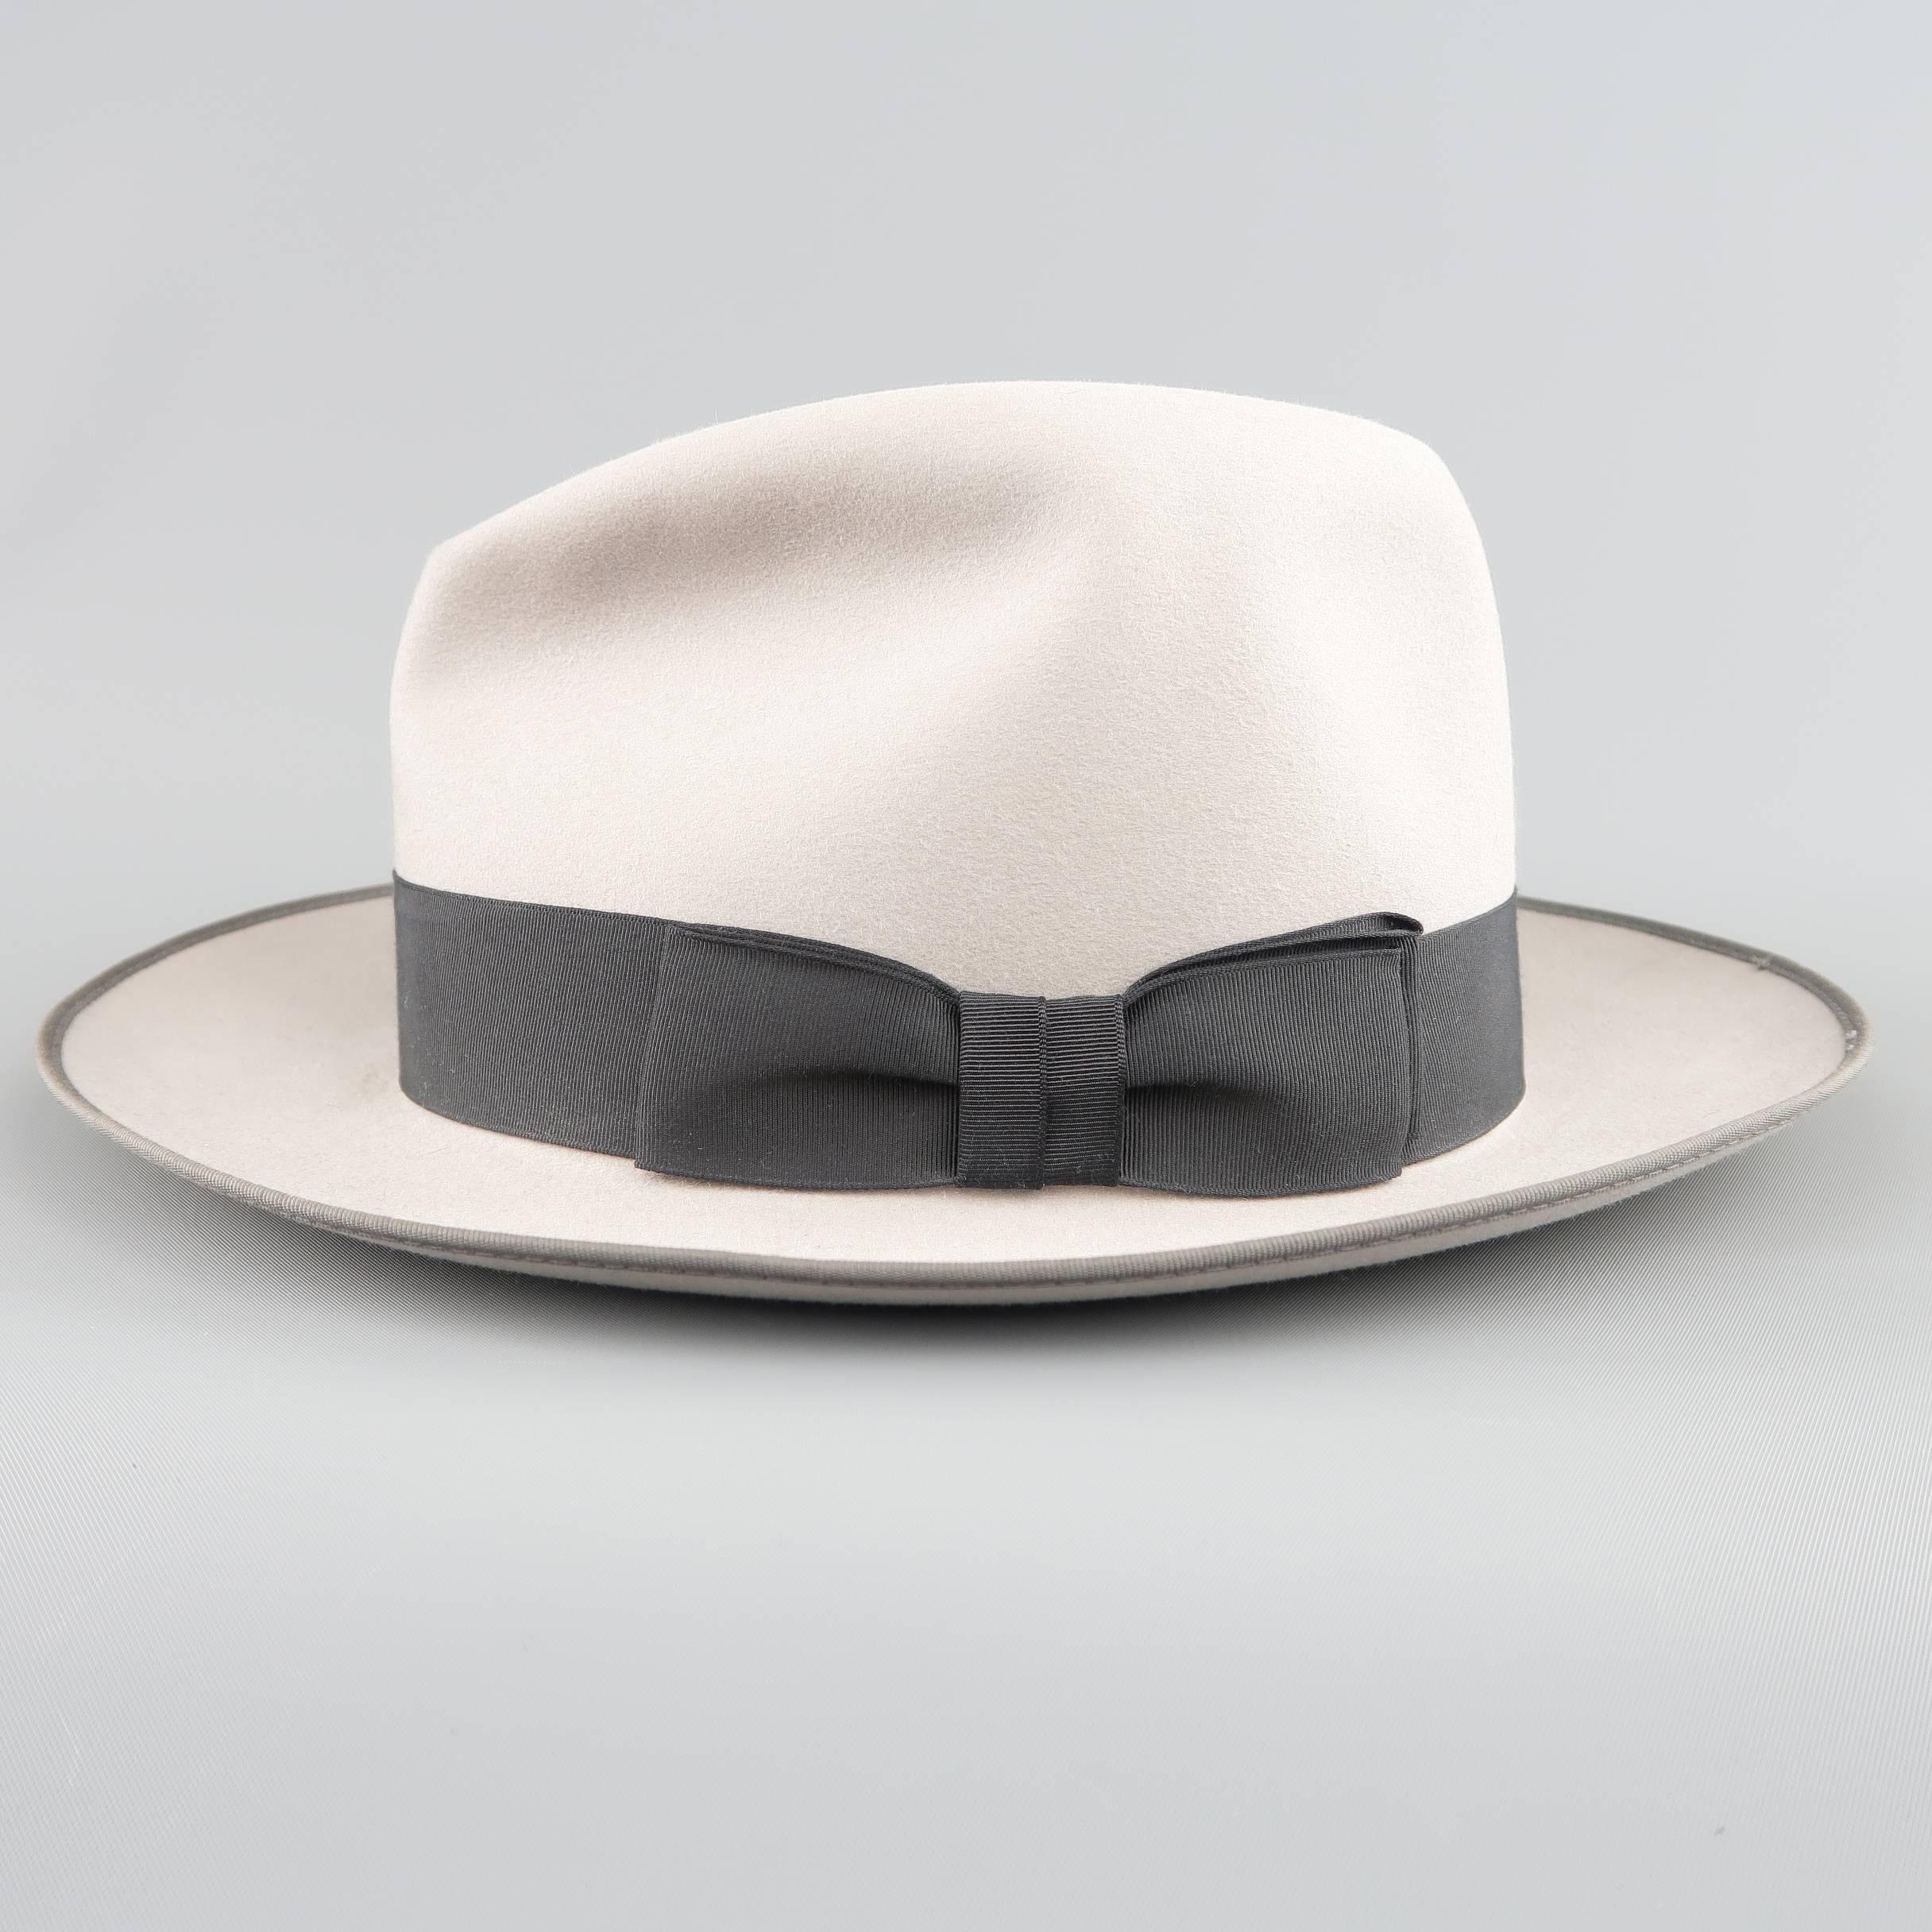 OPTIMO for WILKES BASHFORD fedora comes in light silver  gray felt with black grosgrain ribbon and charcoal faille piping.  Includes original box.
 
Excellent Pre-Owned Condition.
Marked: 59
 
Size: 7 3/8
Brim: 2.5 in.


SKU: 85253